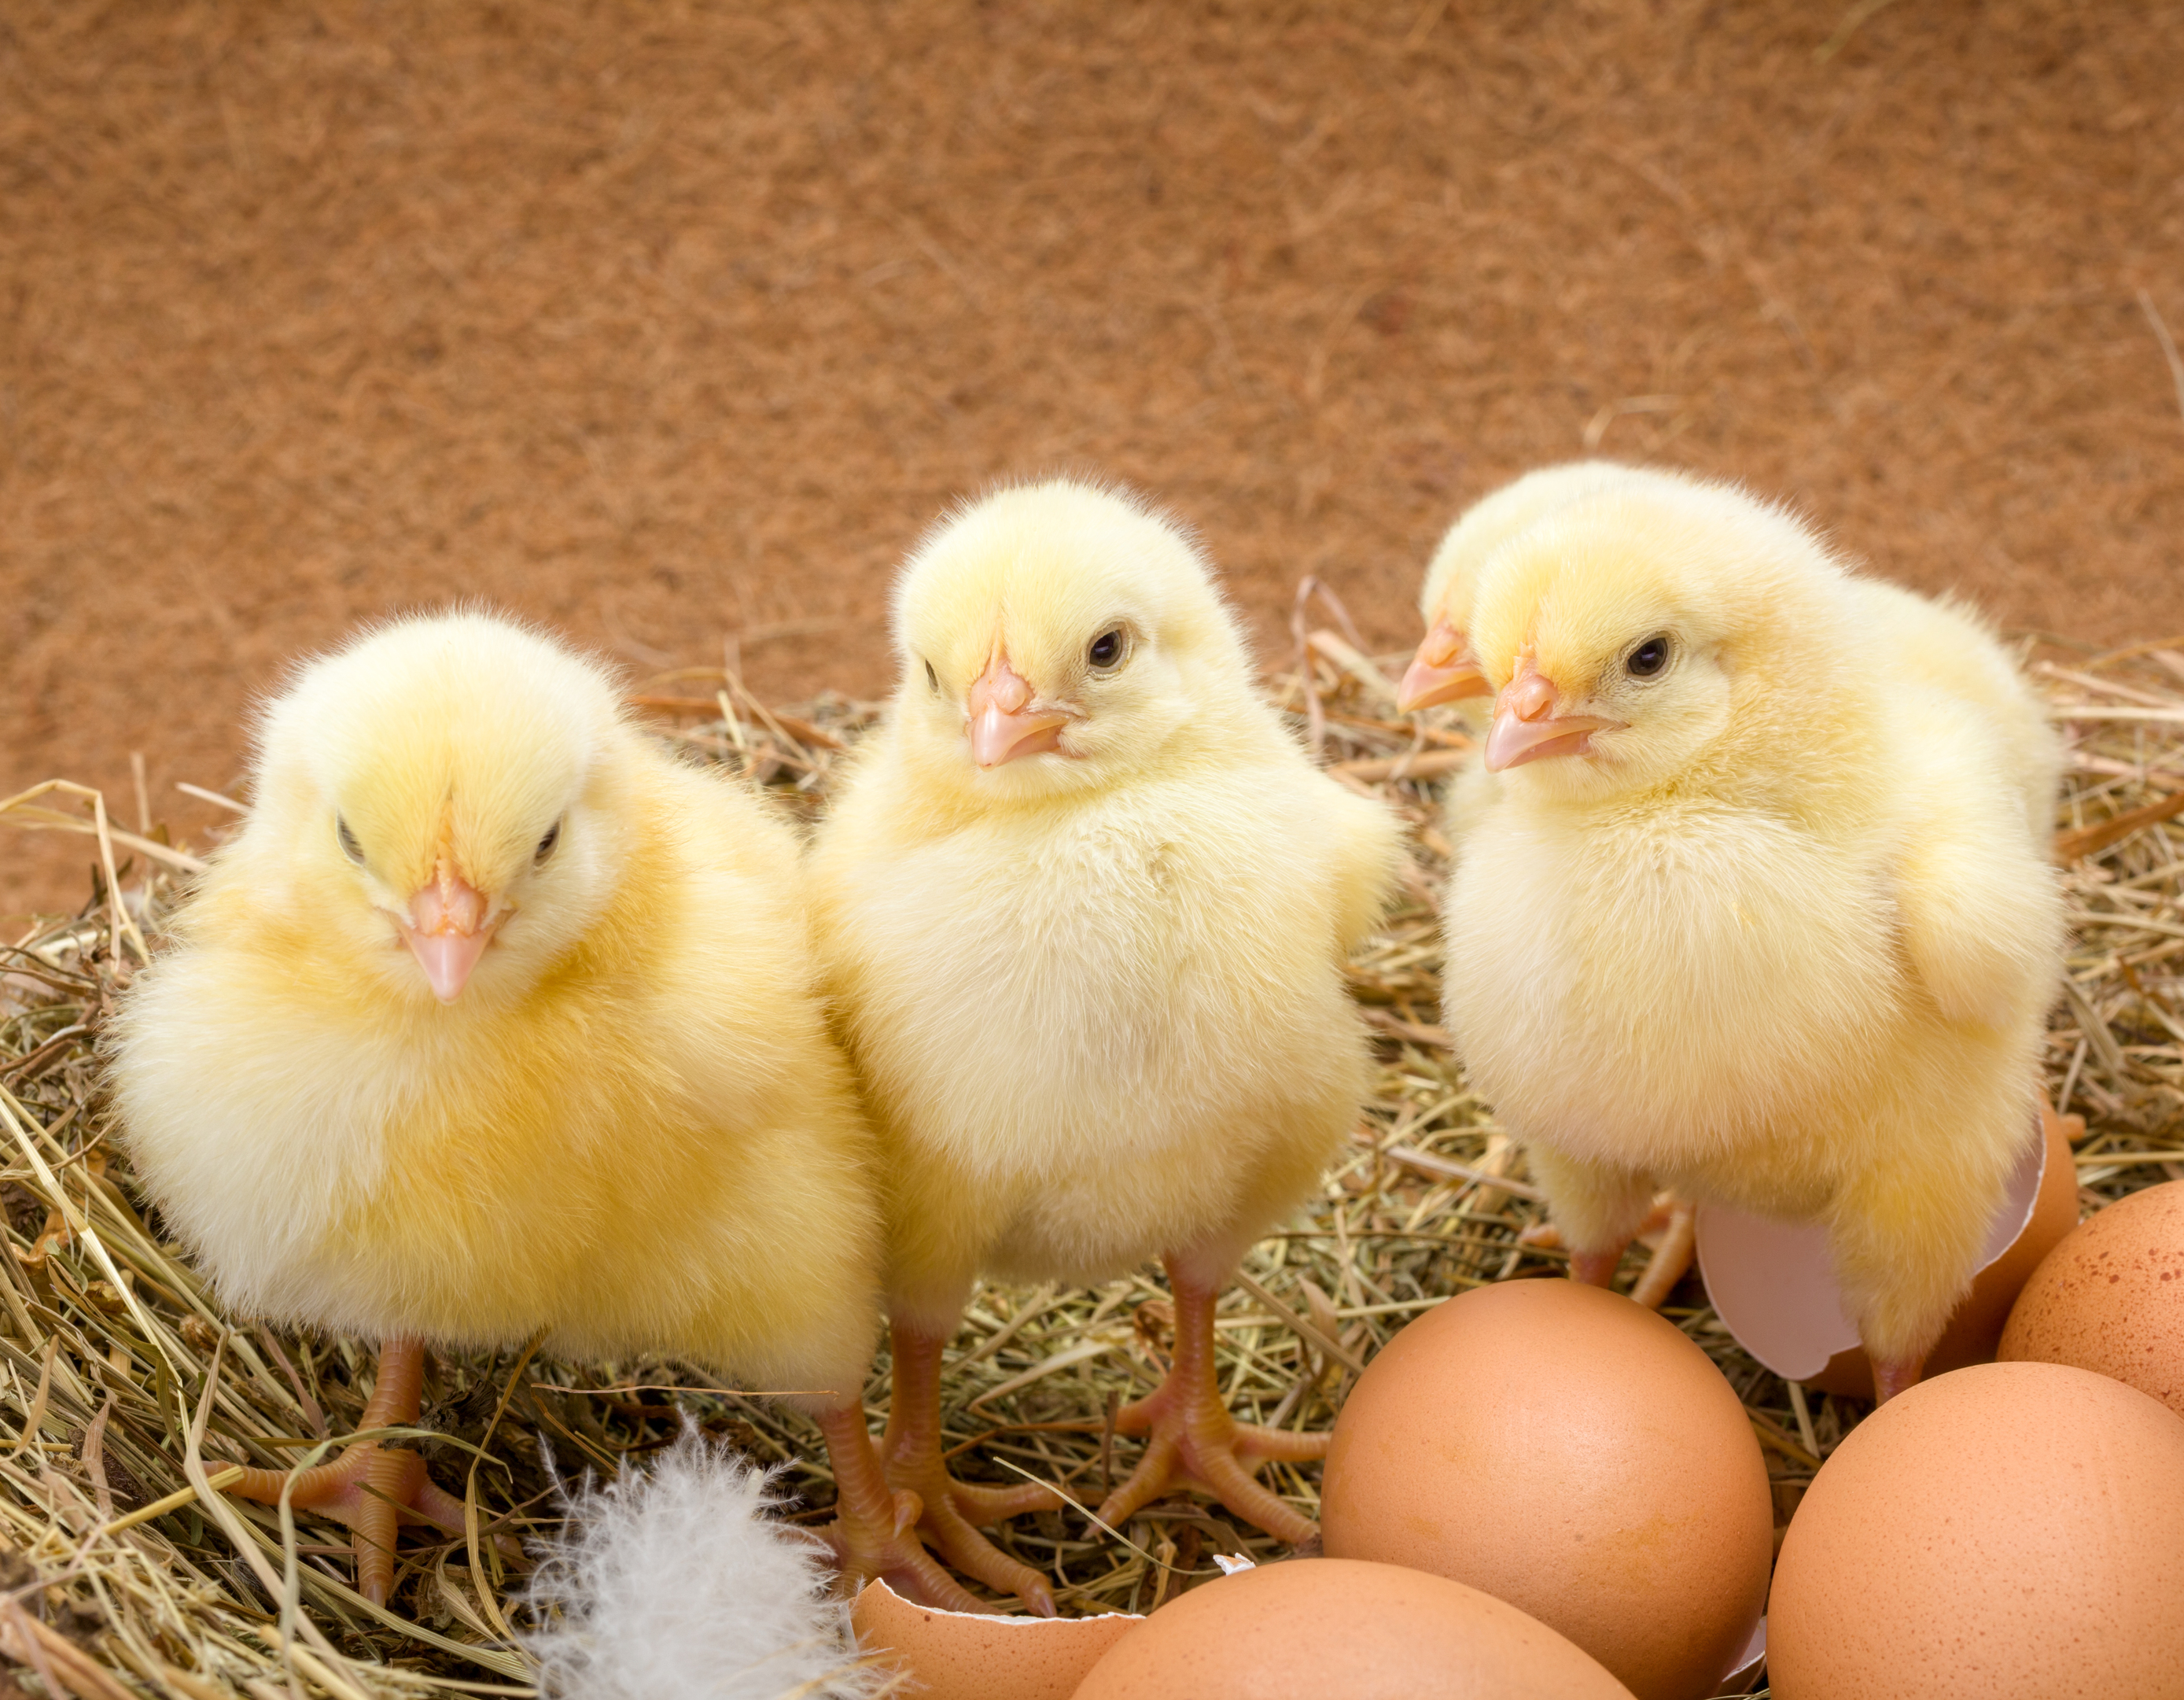 photodune-15857761-newborn-chickens-in-hay-nest-along-whole-and-broken-eggs-l